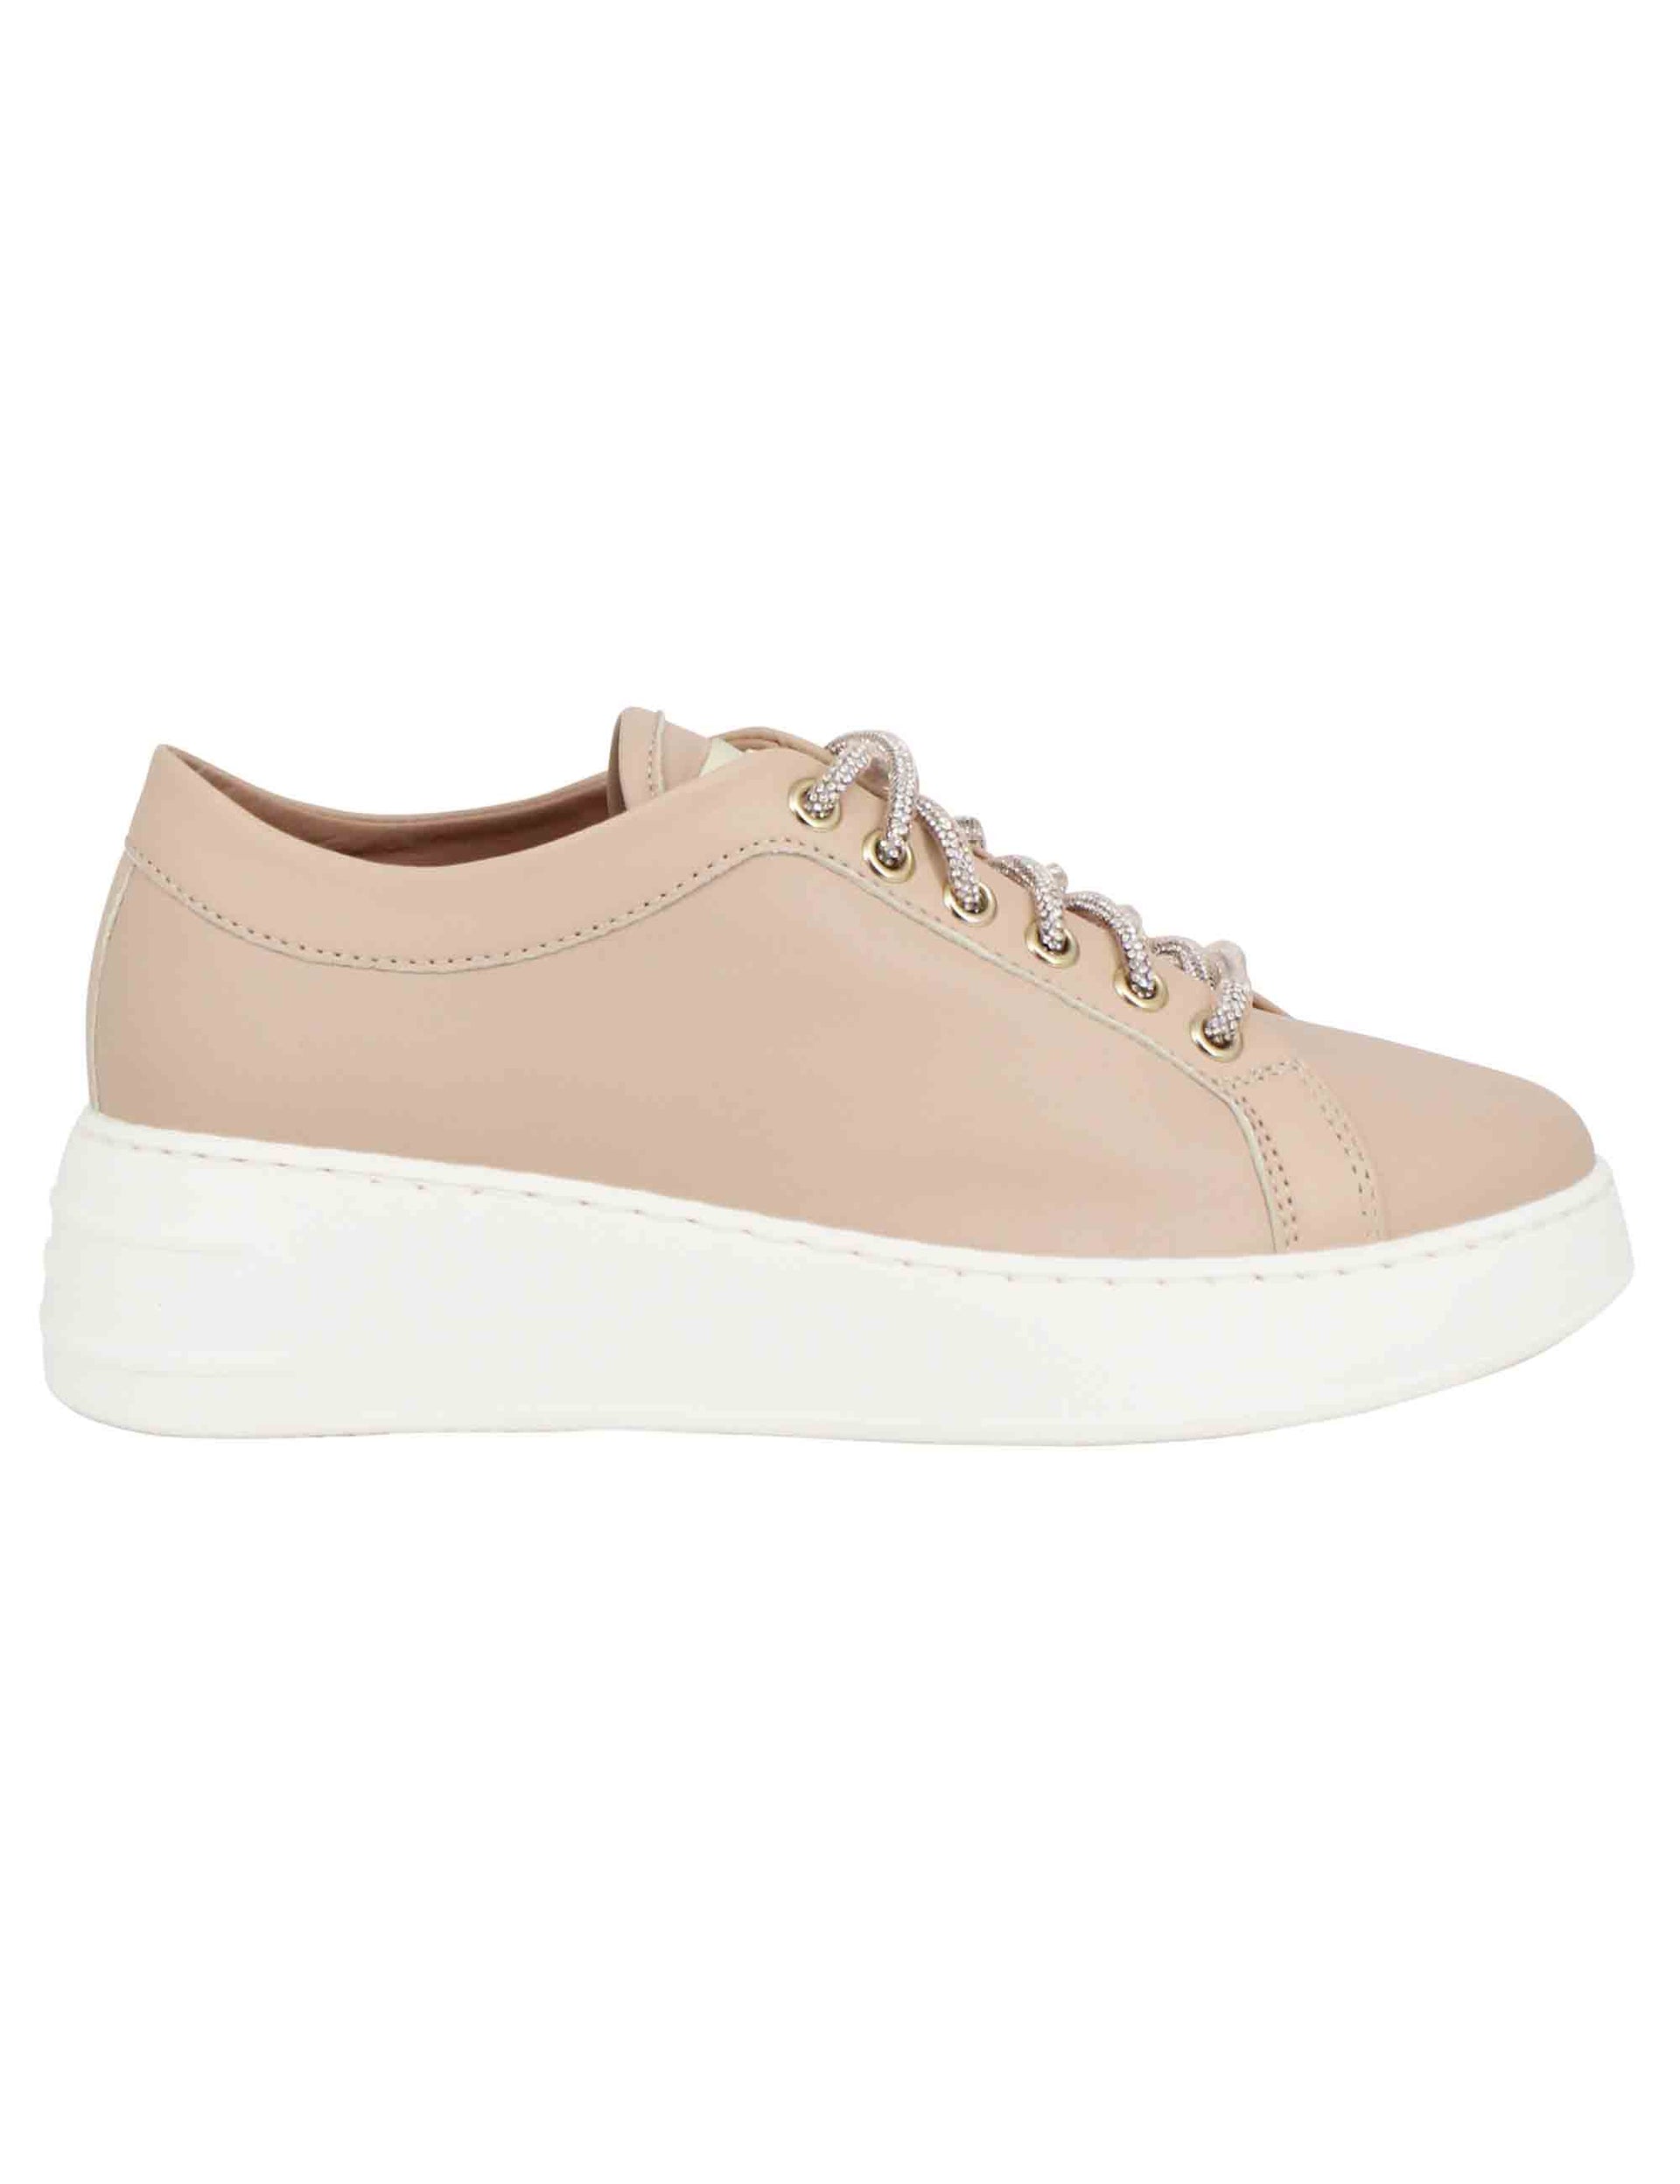 Women's nude leather sneakers with rhinestone laces